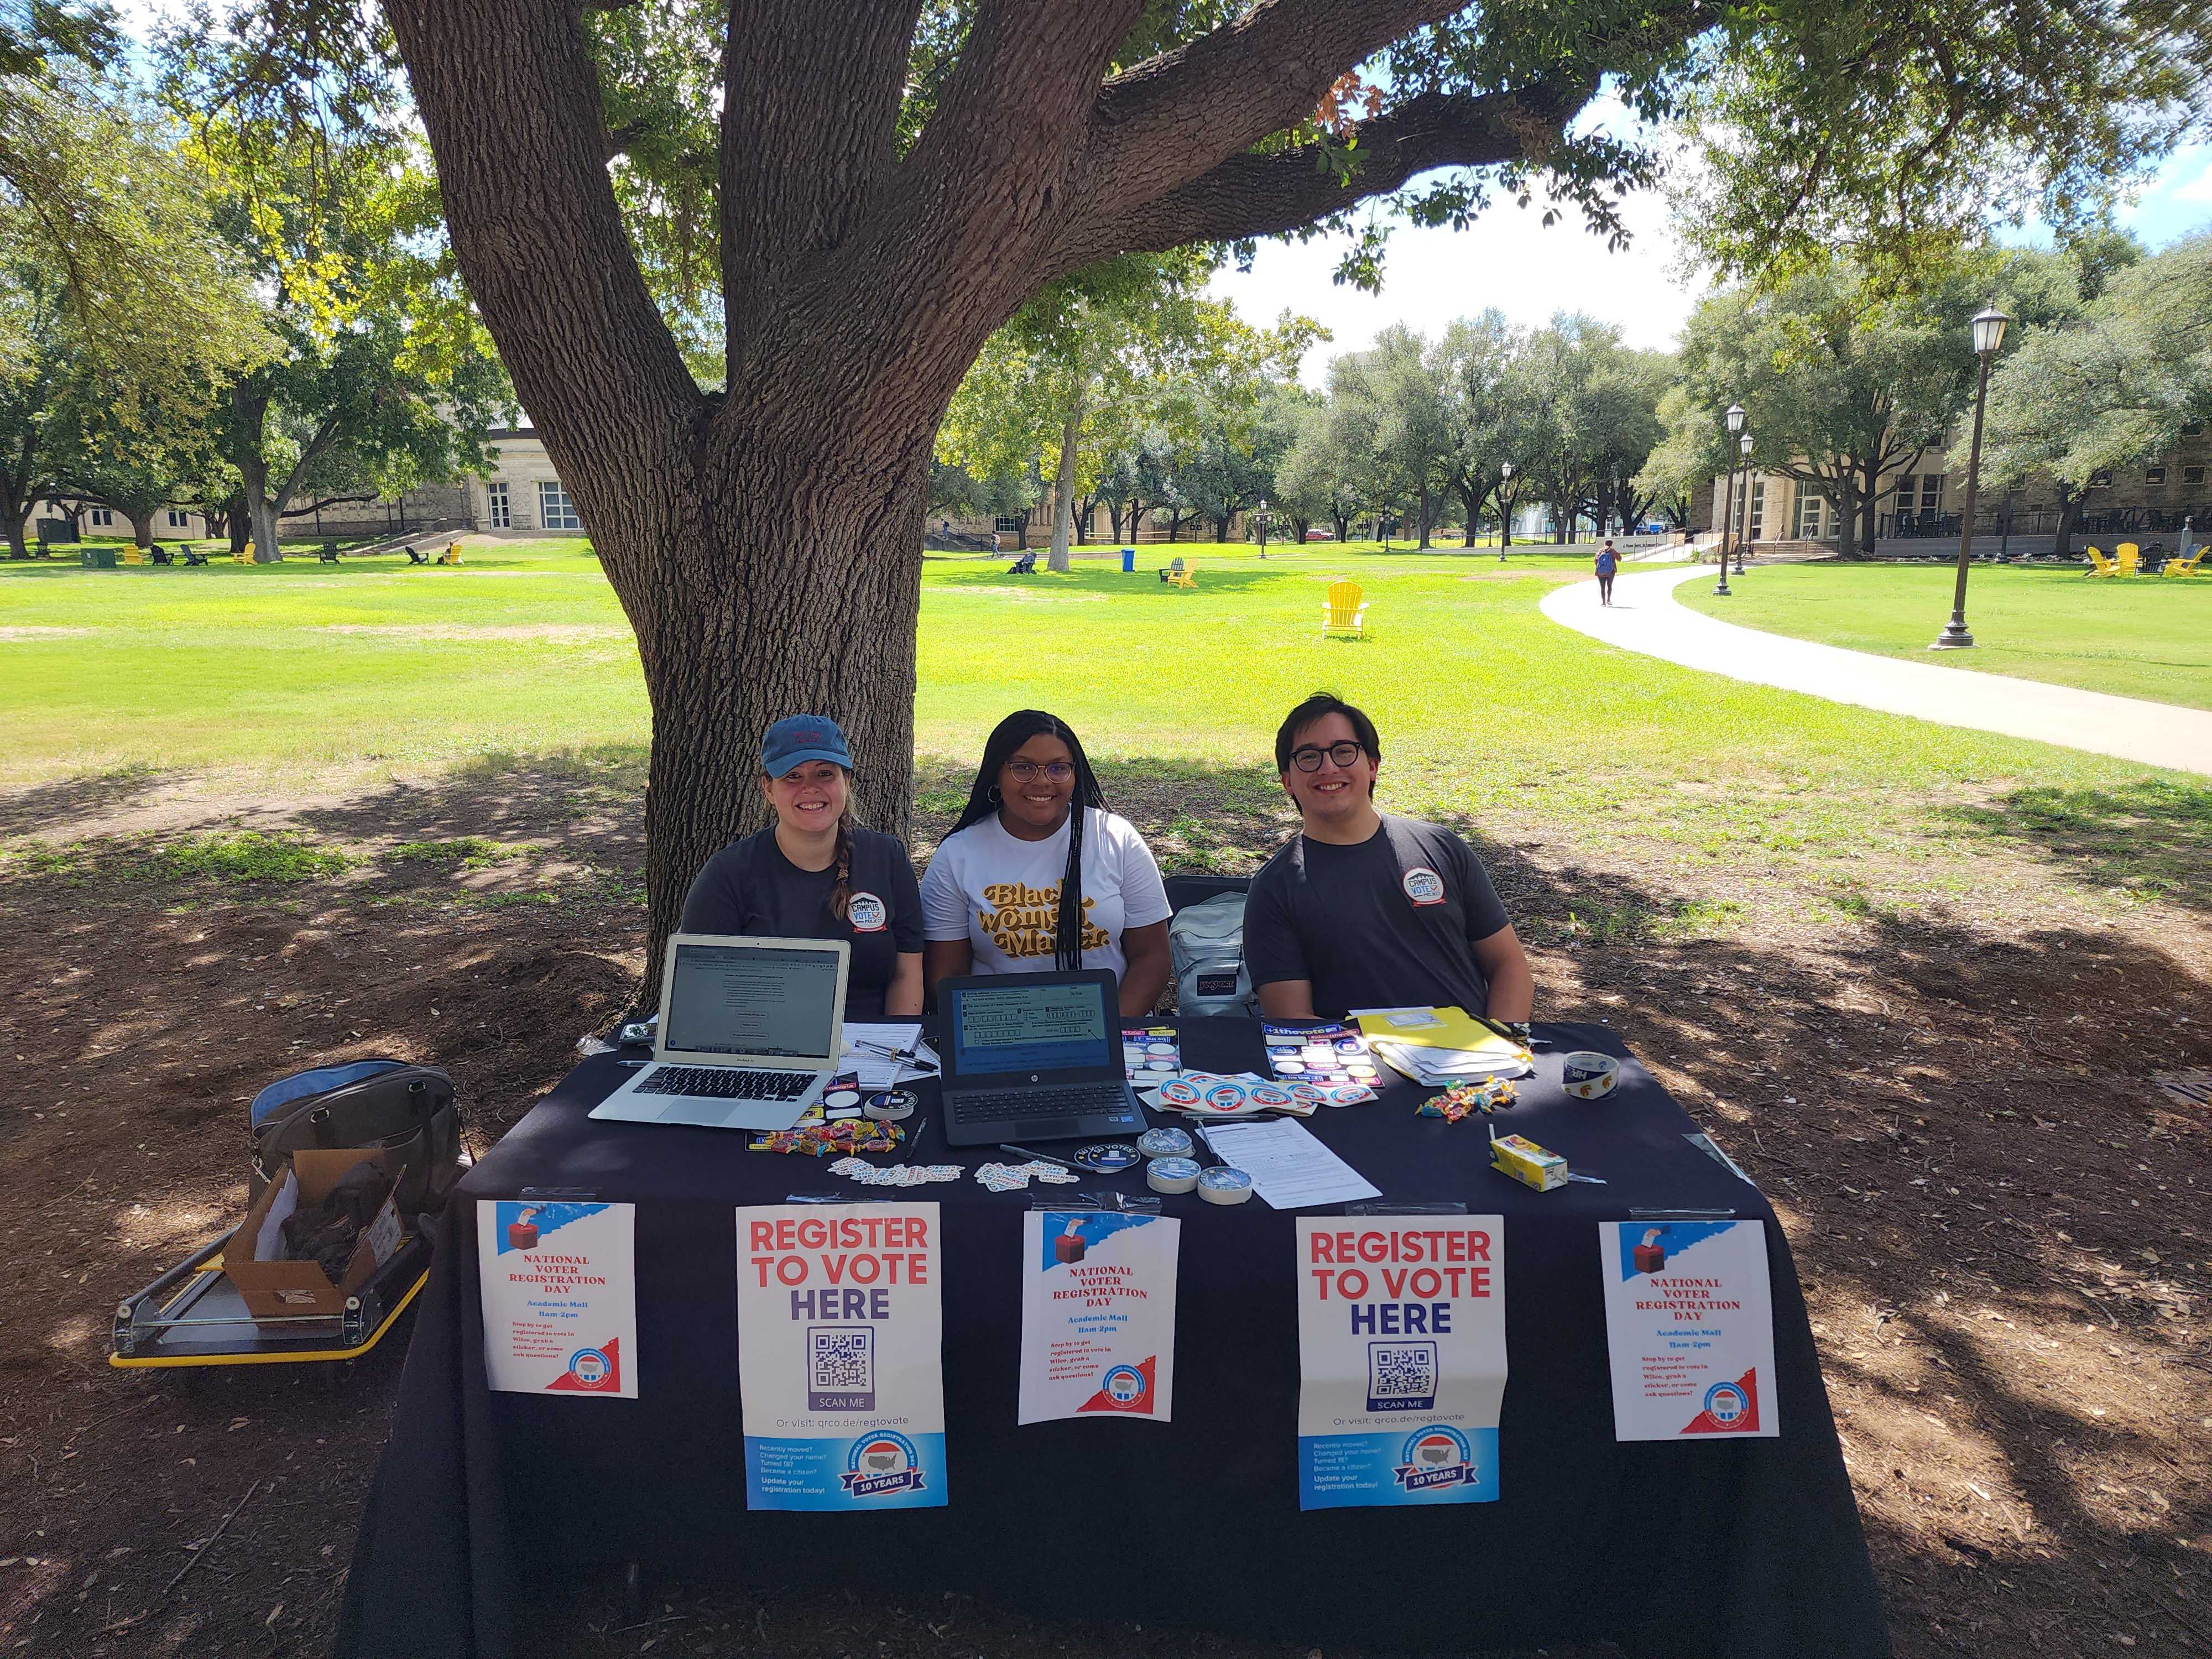 Three students sit at a table in front of a tree on a green lawn. The sign on the table reads "register to vote here."